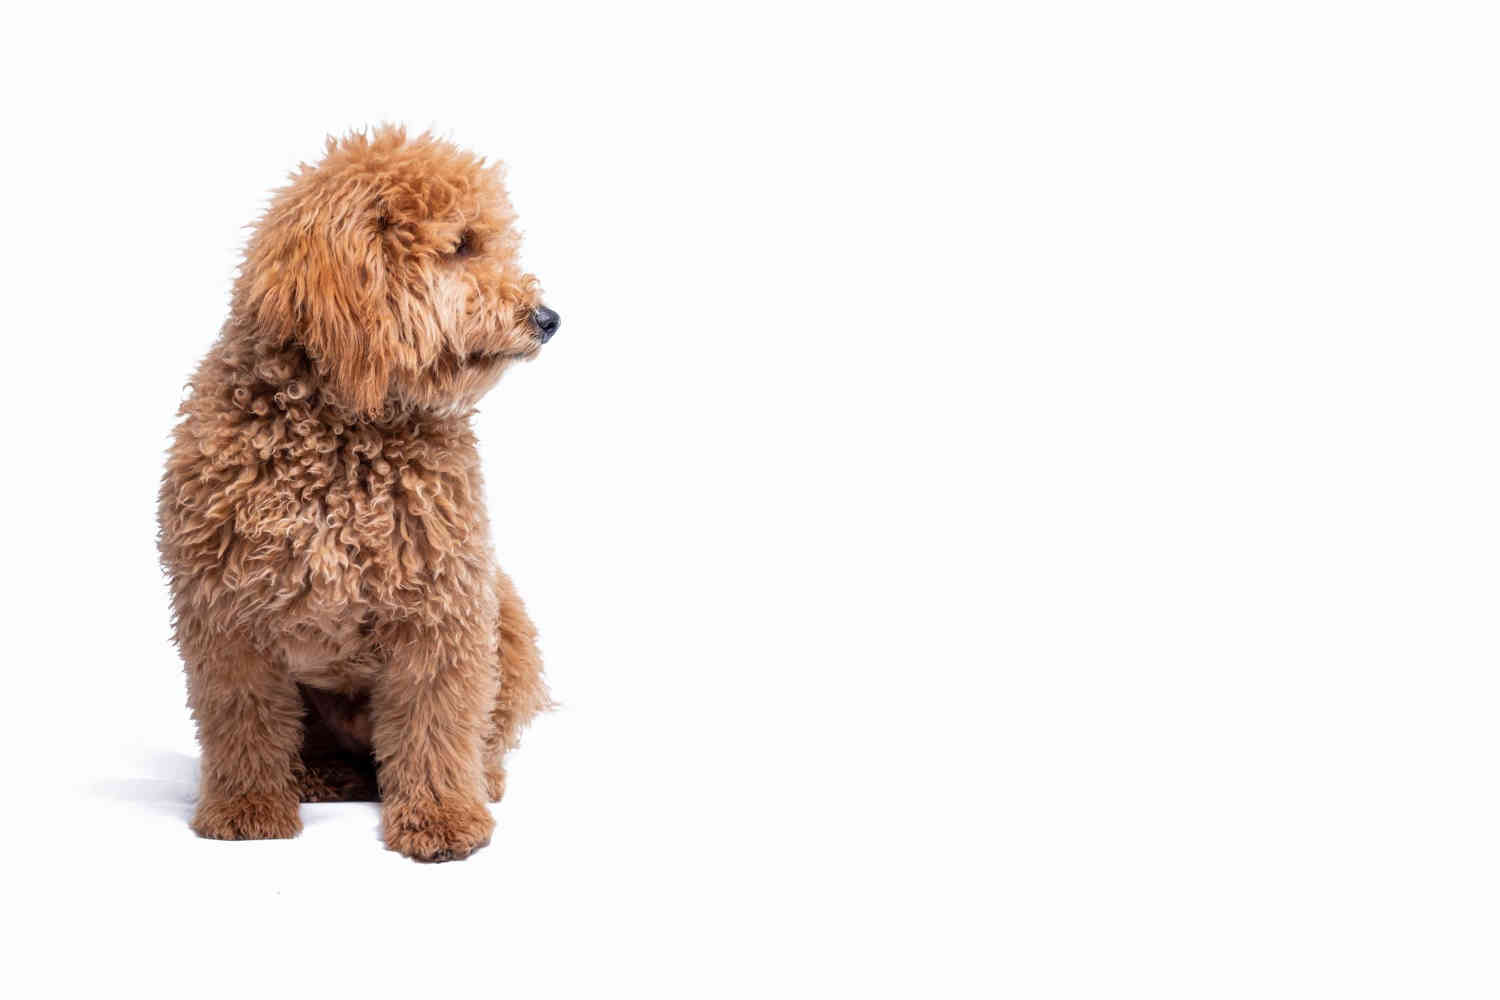 10 Effective Ways to Keep Your Goldendoodle Cool and Comfortable This Summer